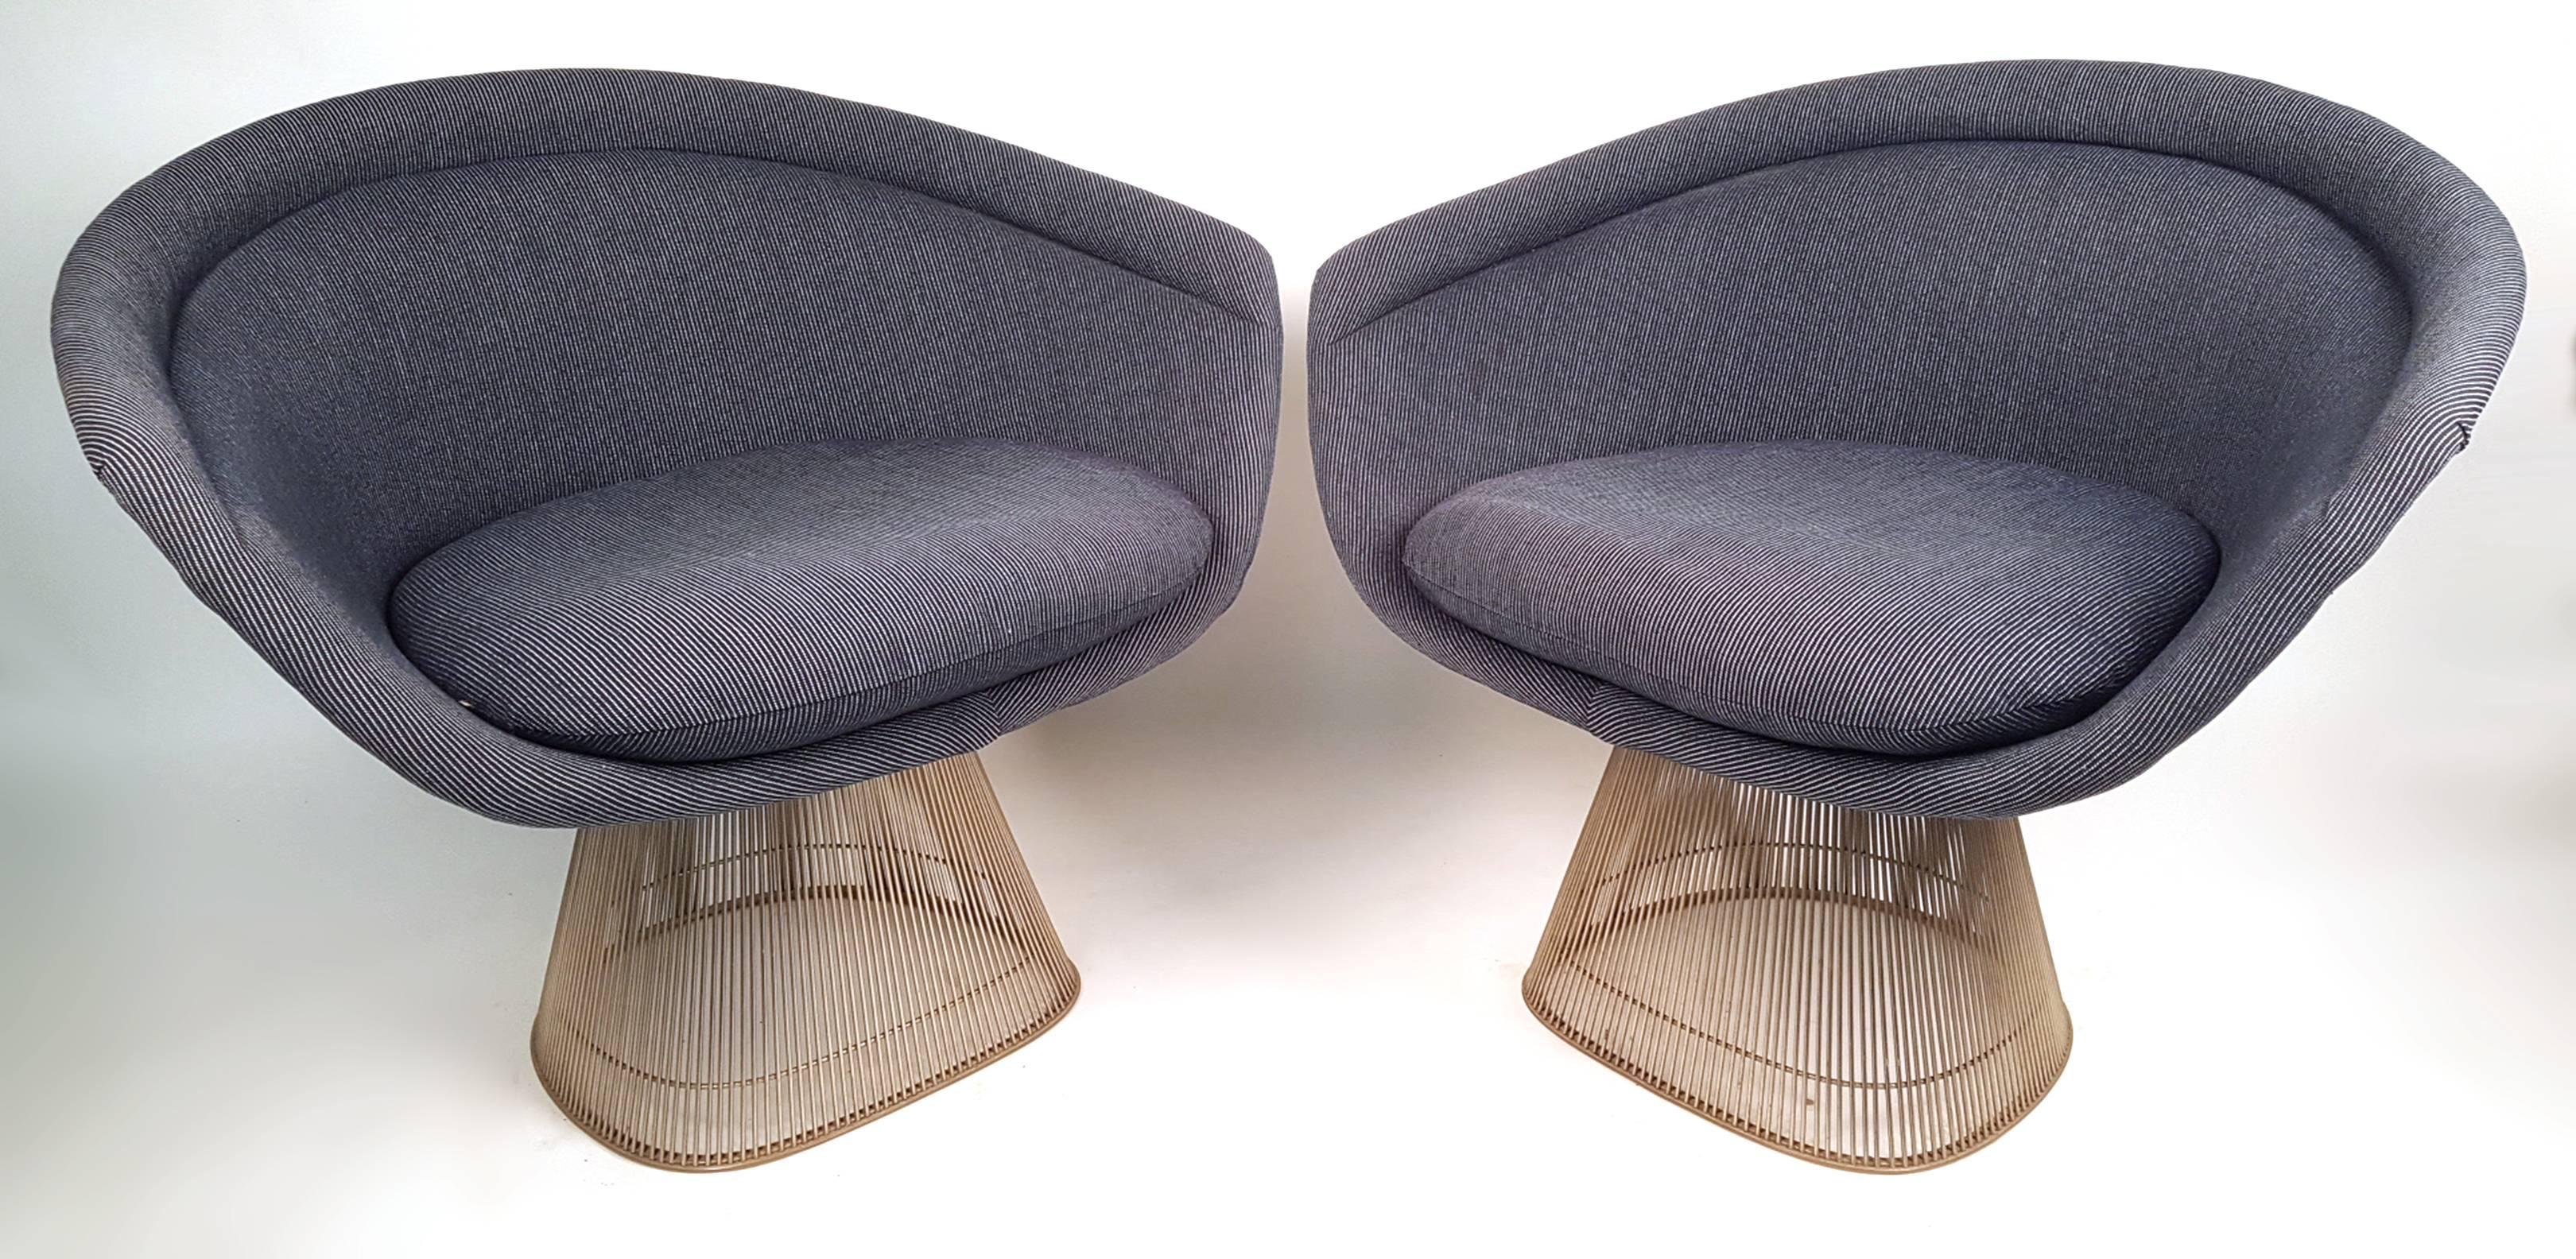 Lounge chairs designed by Warren Platner, 1966 for Knoll. Chairs are in very good condition with nickel-plated wire construction.